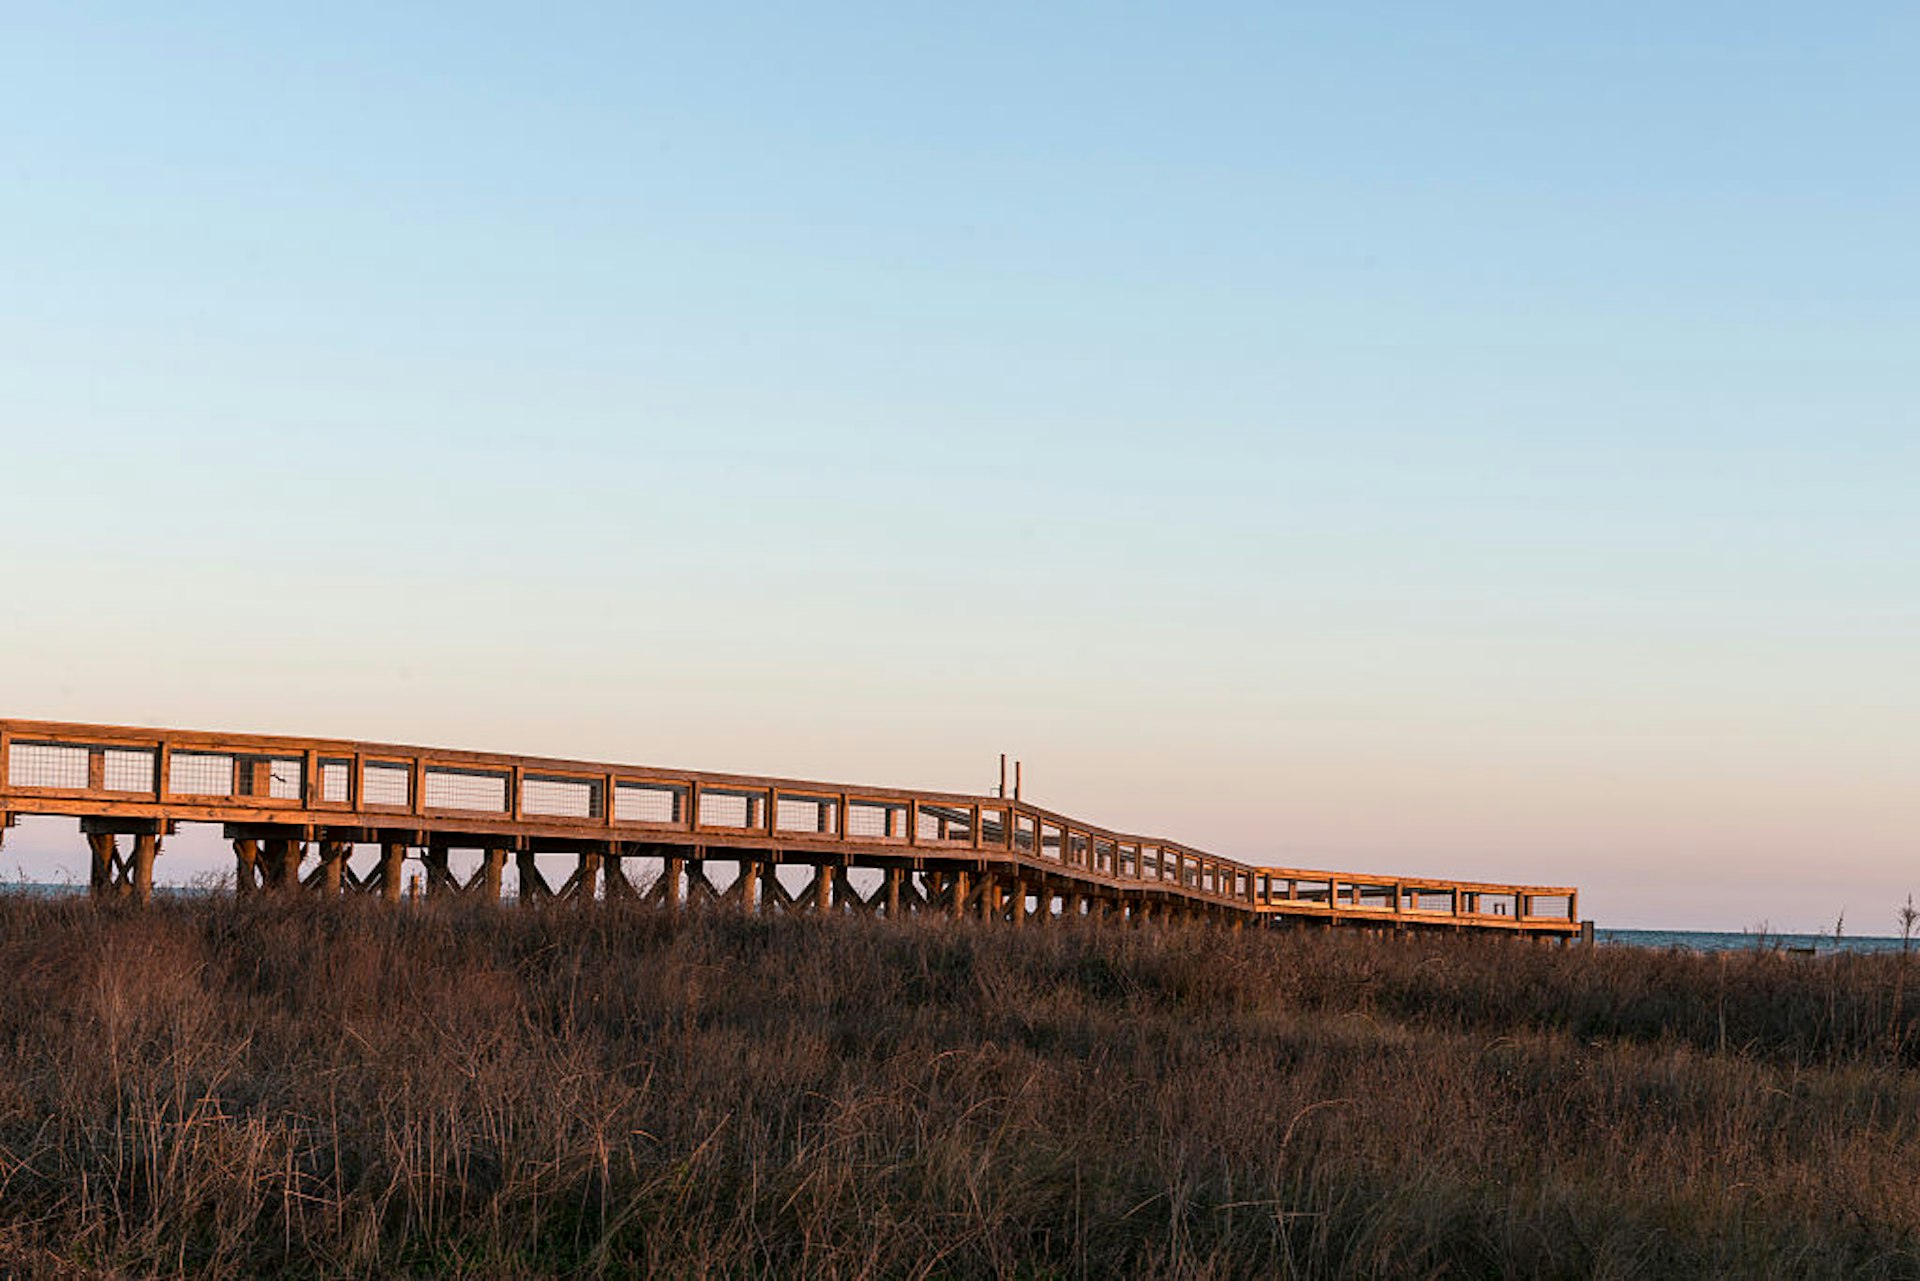 Viewing walkway amid the marshland of Sea Rim State Park in far-southeast Texas